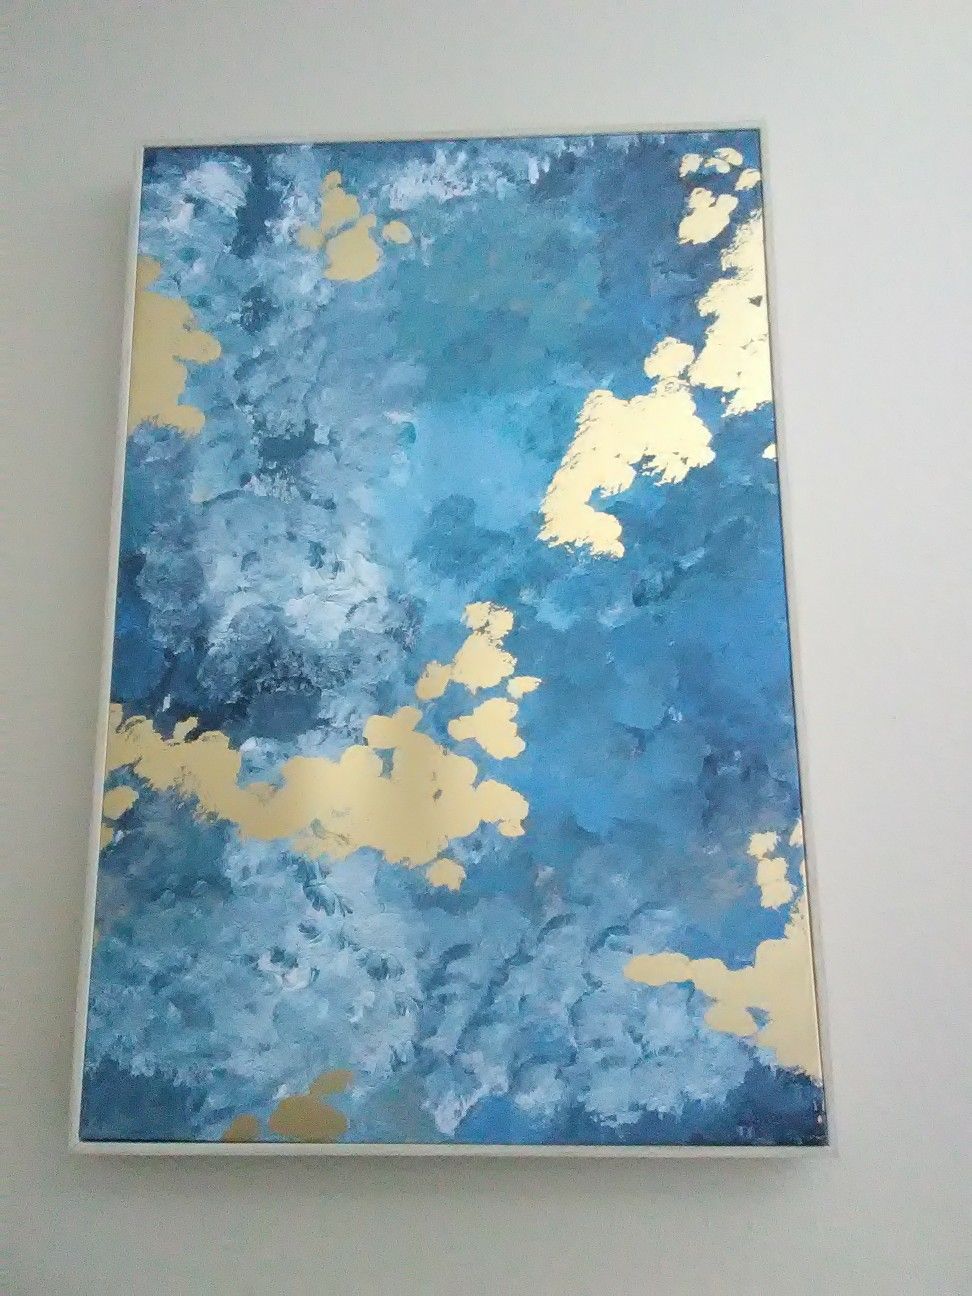 BLUE AND GOLD FOIL PRINT ON CANVAS